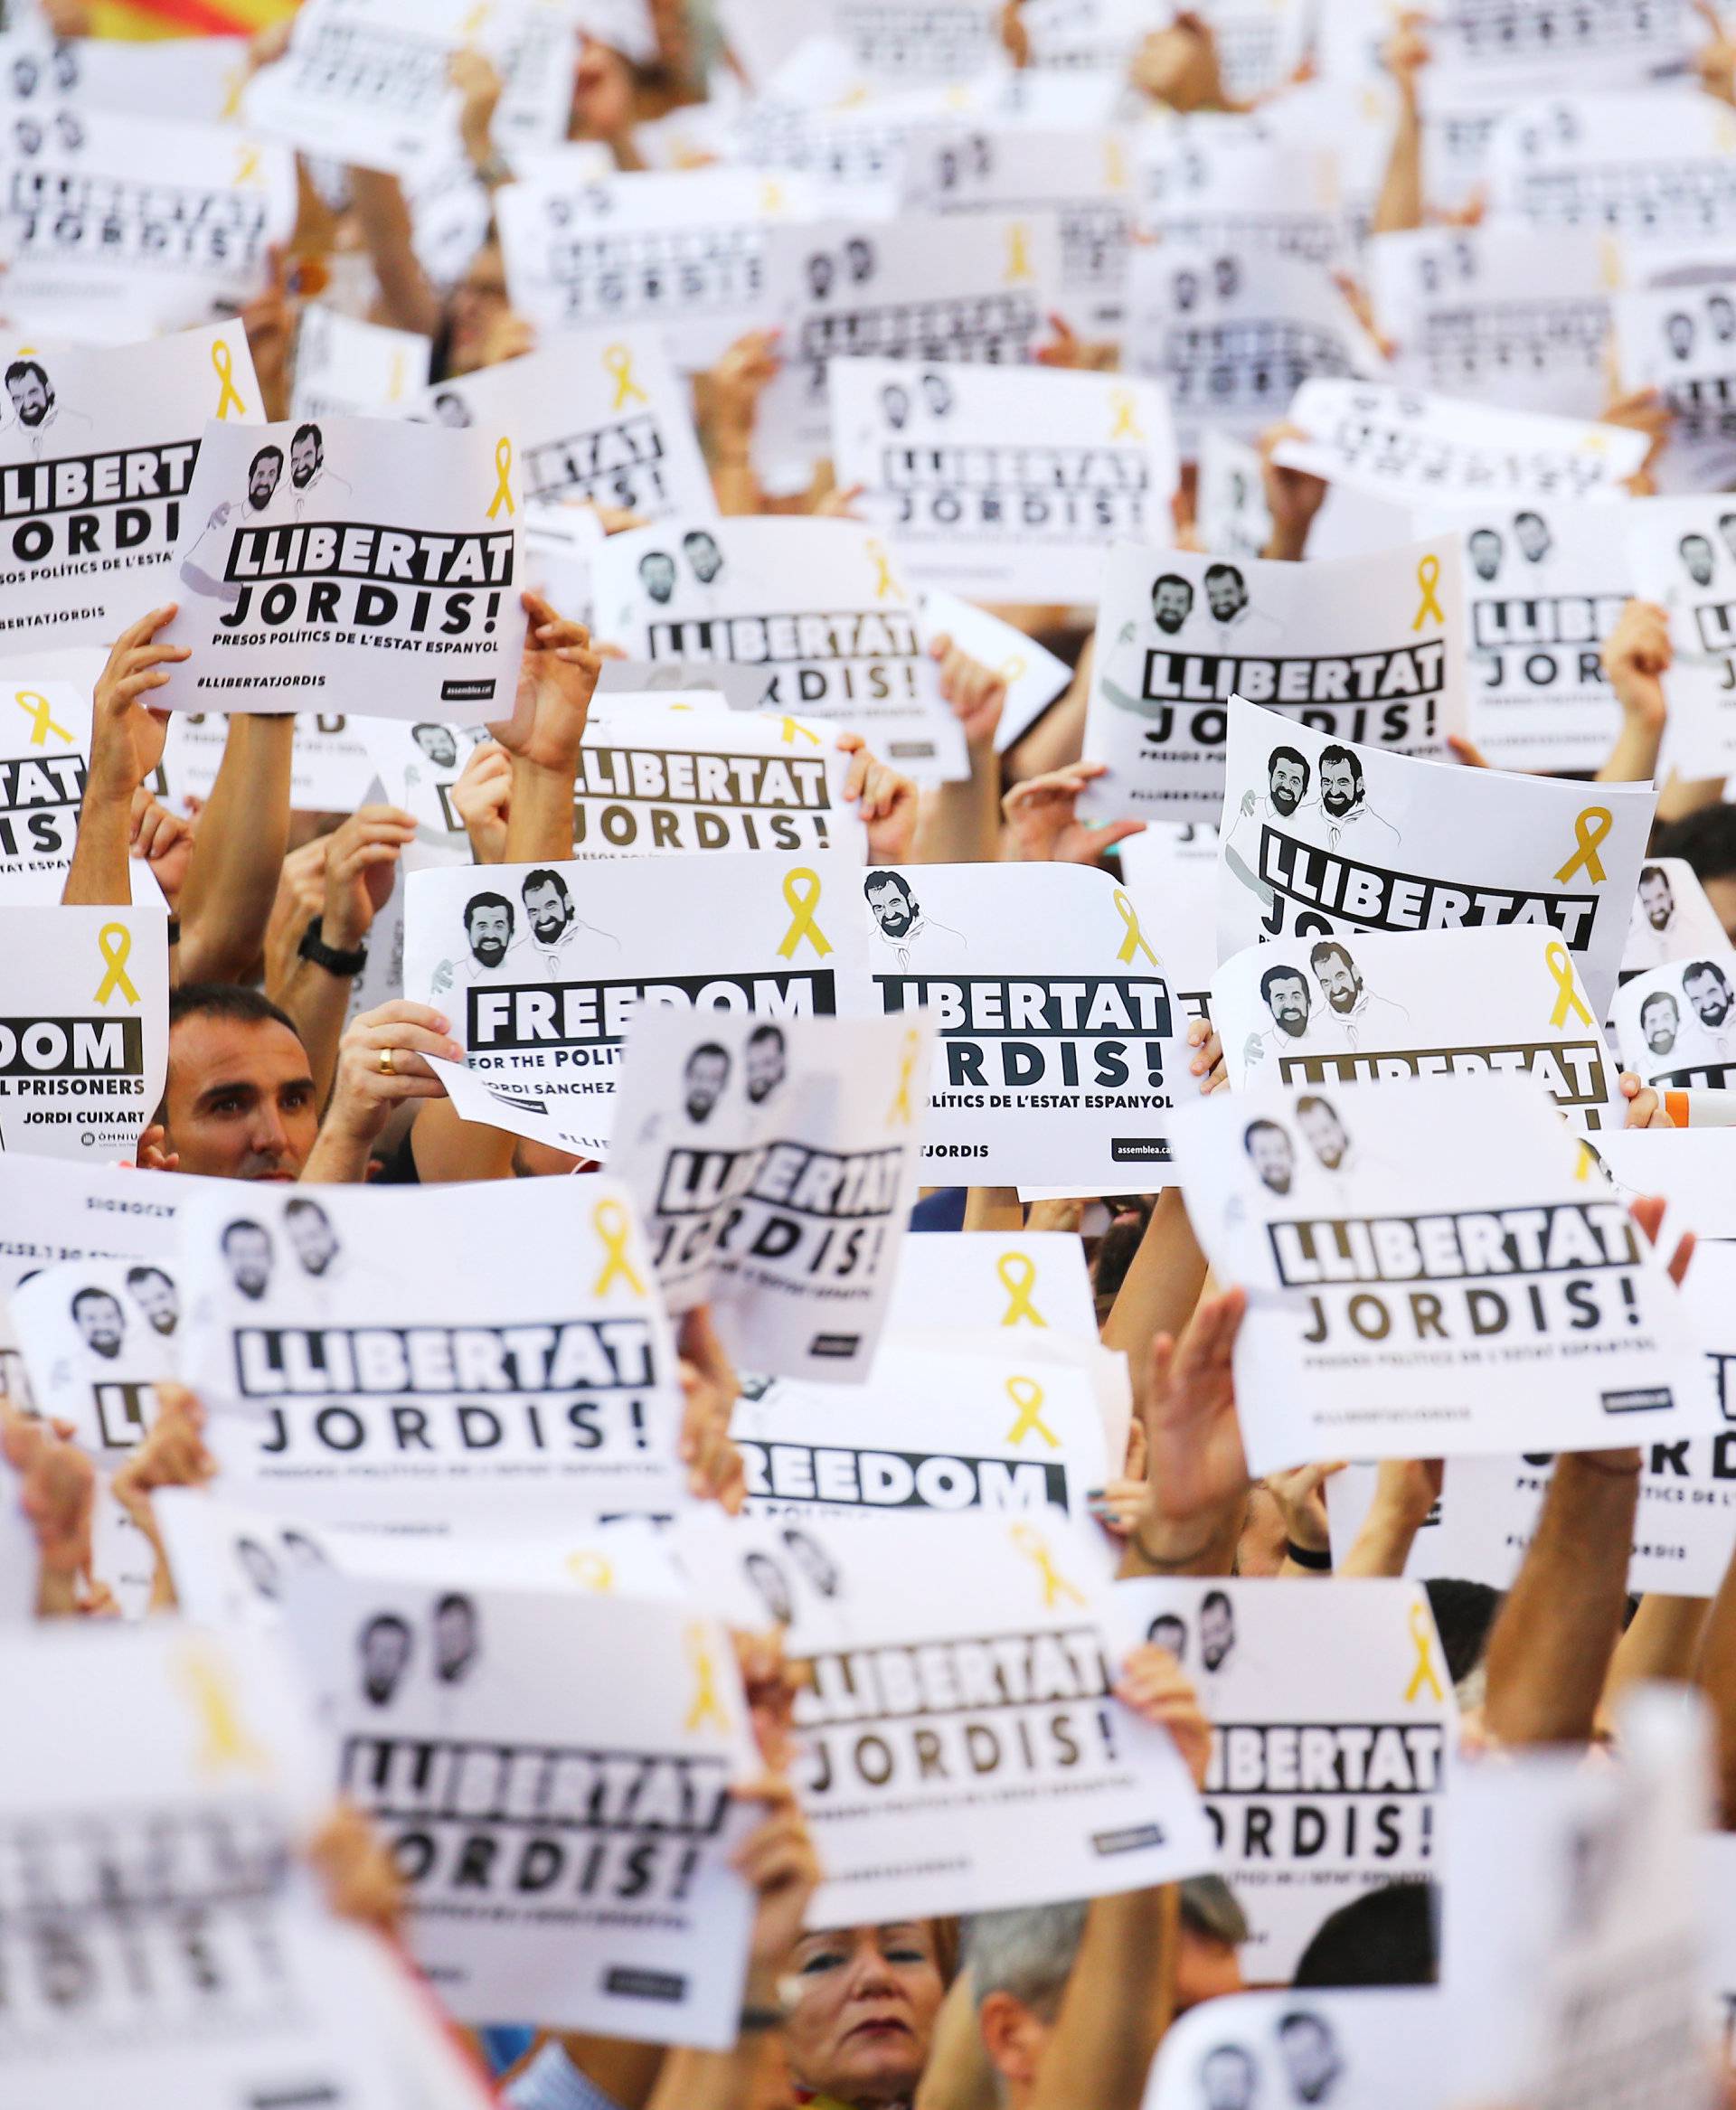 People wave placards which read "Freedom for the Jordis" in Catalan during a demonstration organised by Catalan pro-independence movements ANC (Catalan National Assembly) and Omnium Cutural, following the imprisonment of their two leaders in Barcelona